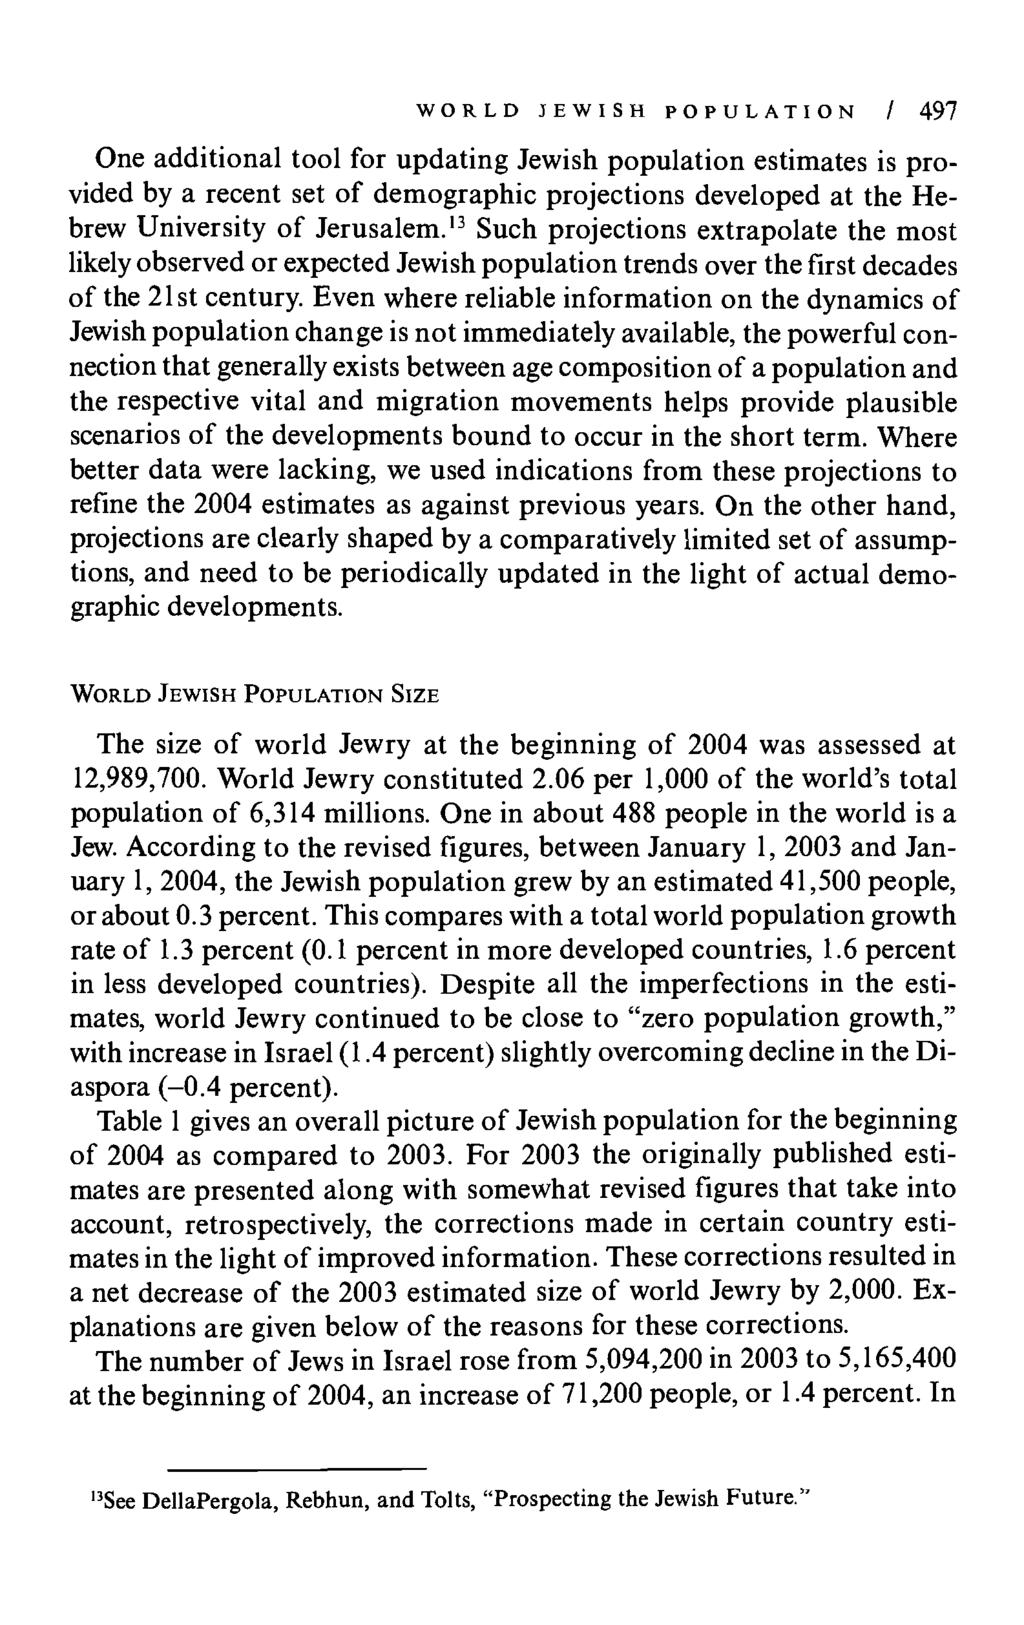 WORLD JEWISH POPULATION / 497 One additional tool for updating Jewish population estimates is provided by a recent set of demographic projections developed at the Hebrew University of Jerusalem.